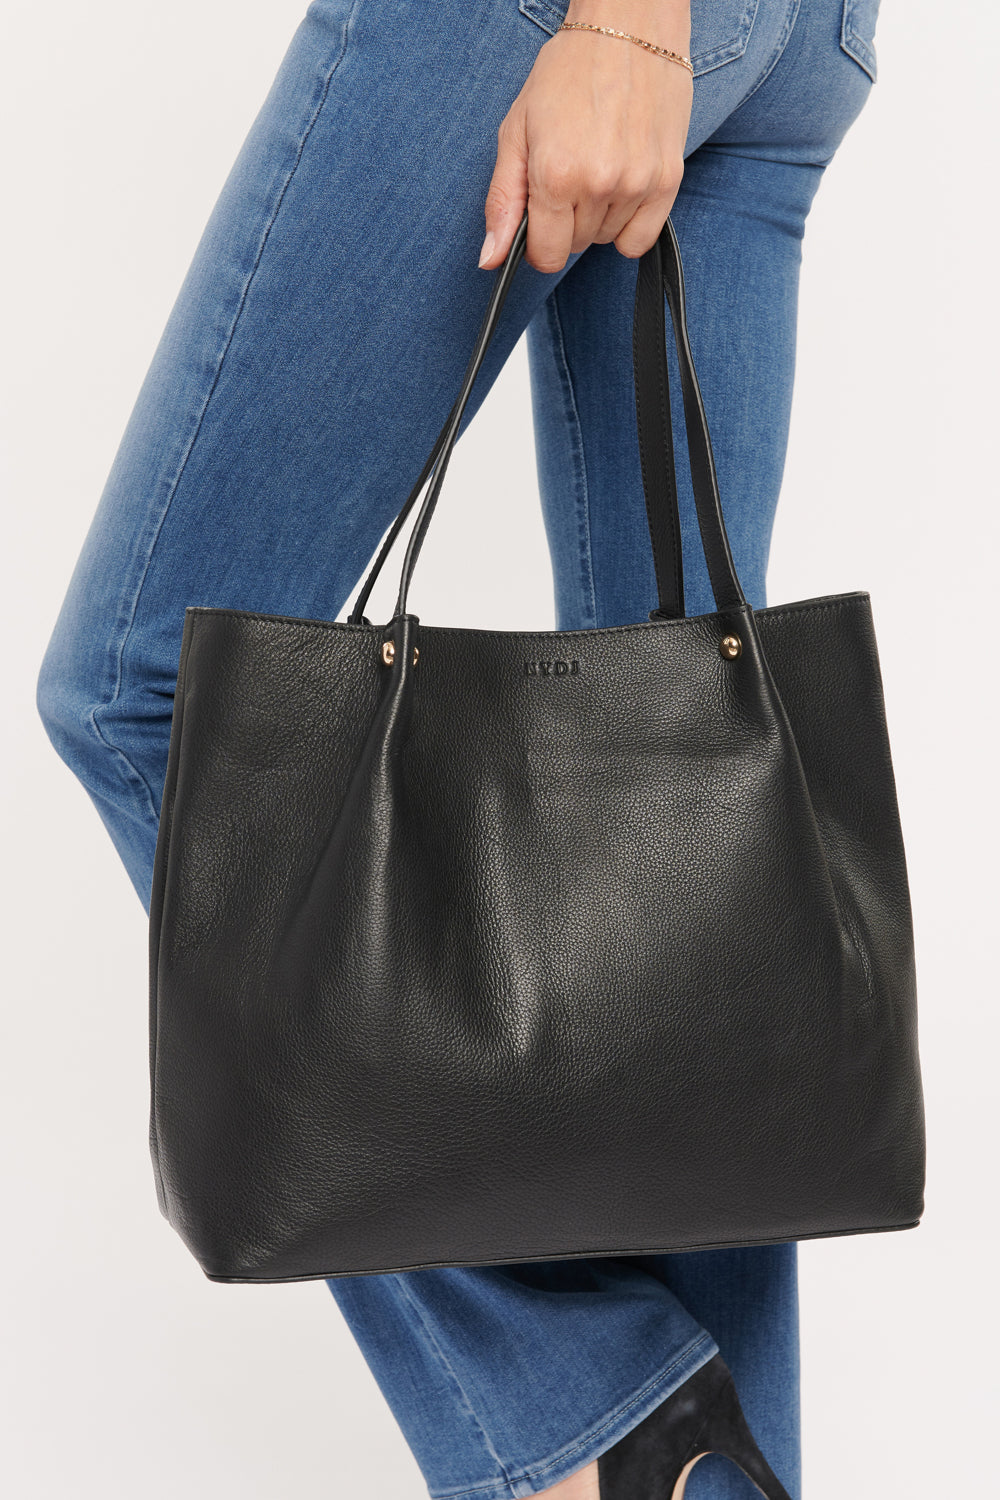 NYDJ Leather Tote Bag With Pouch  - Black